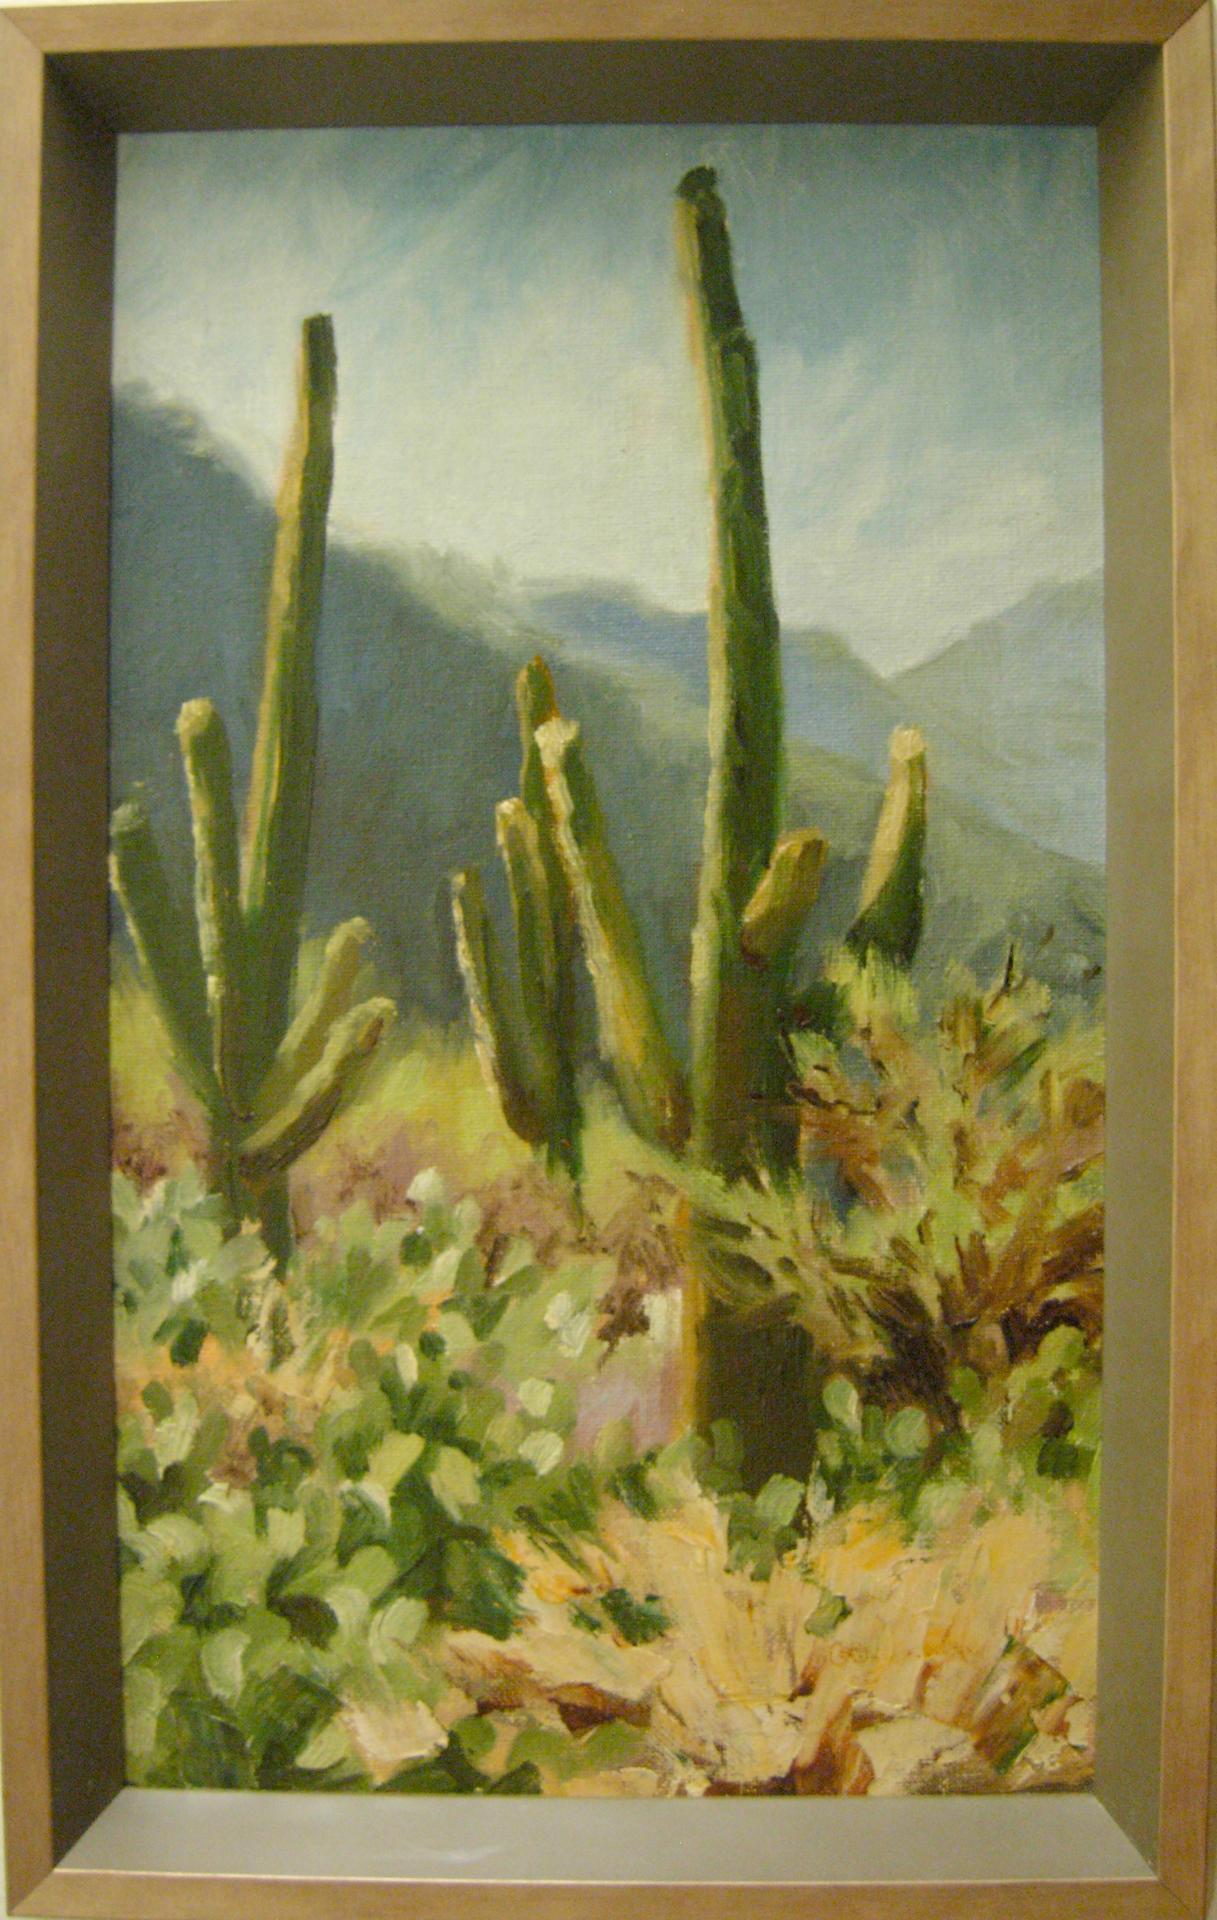 Desert Greys - Painting by Cathy Goodale